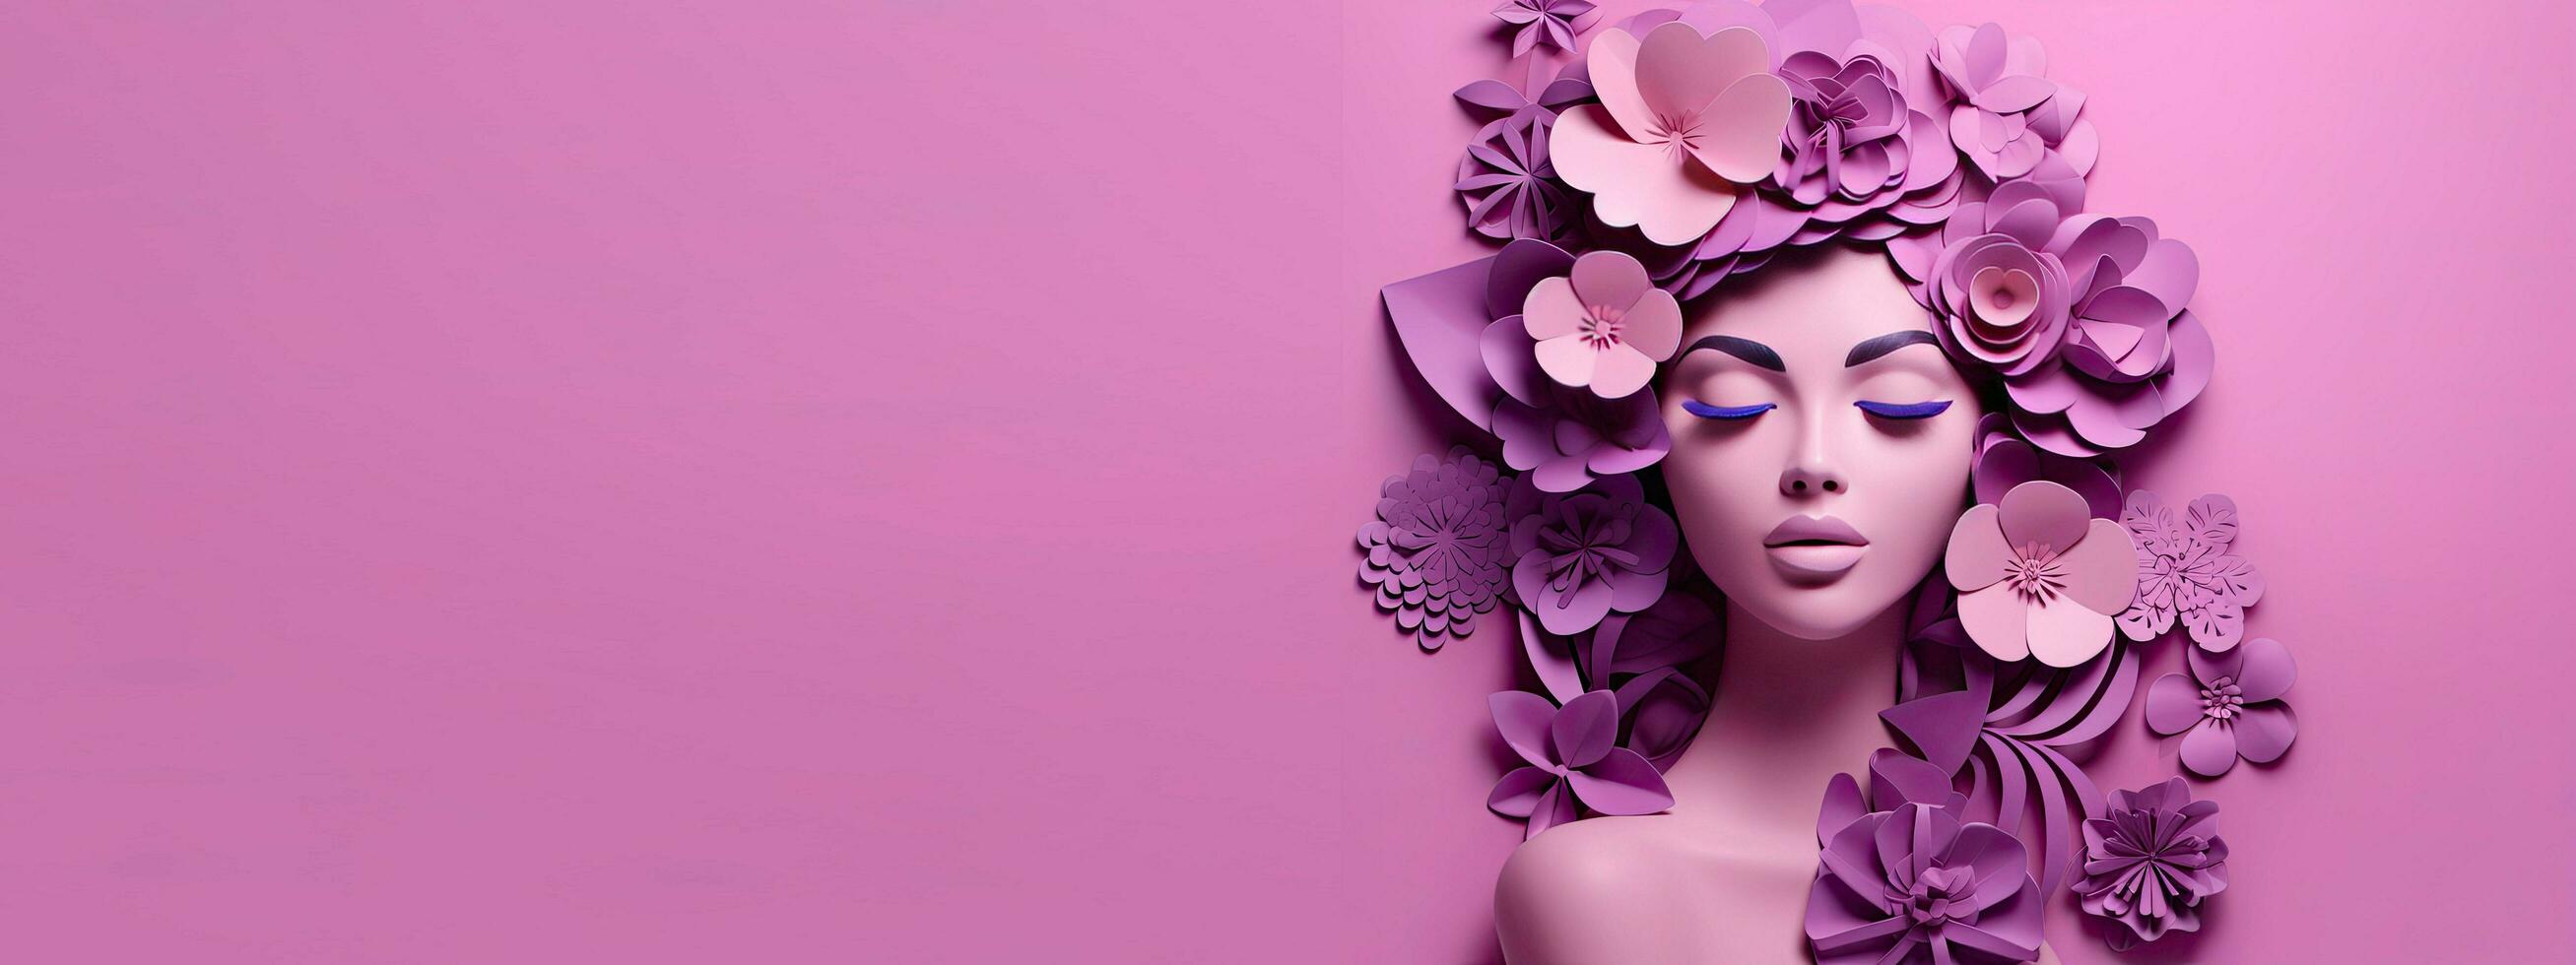 AI generated Paper art pretty women's faces in honor of international women's day on march 8th, with free copy space. photo